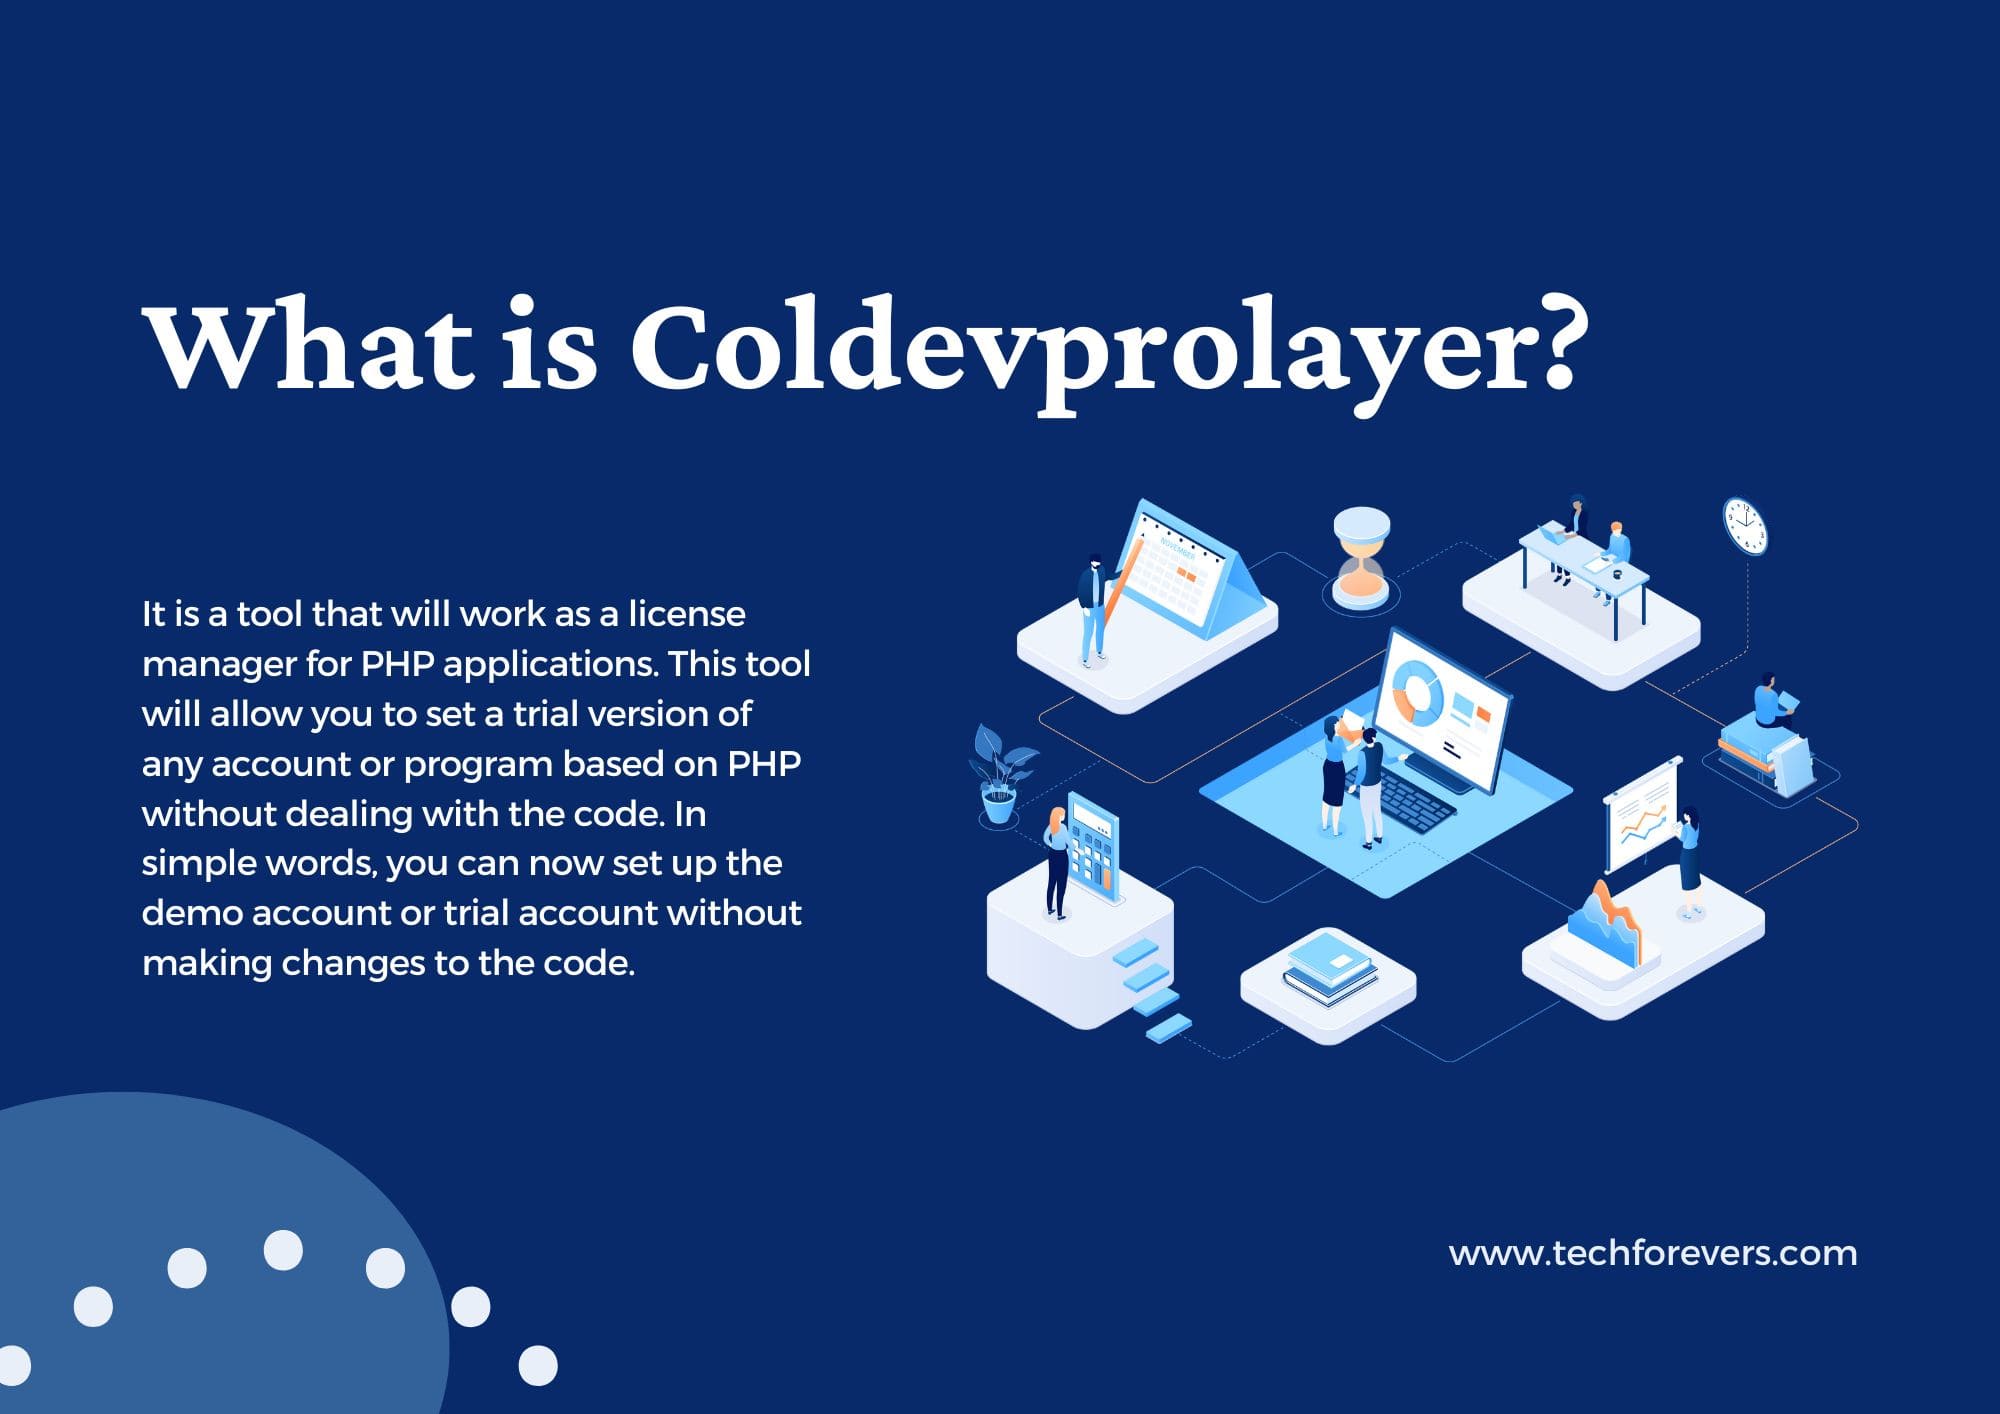 What is Coldevprolayer